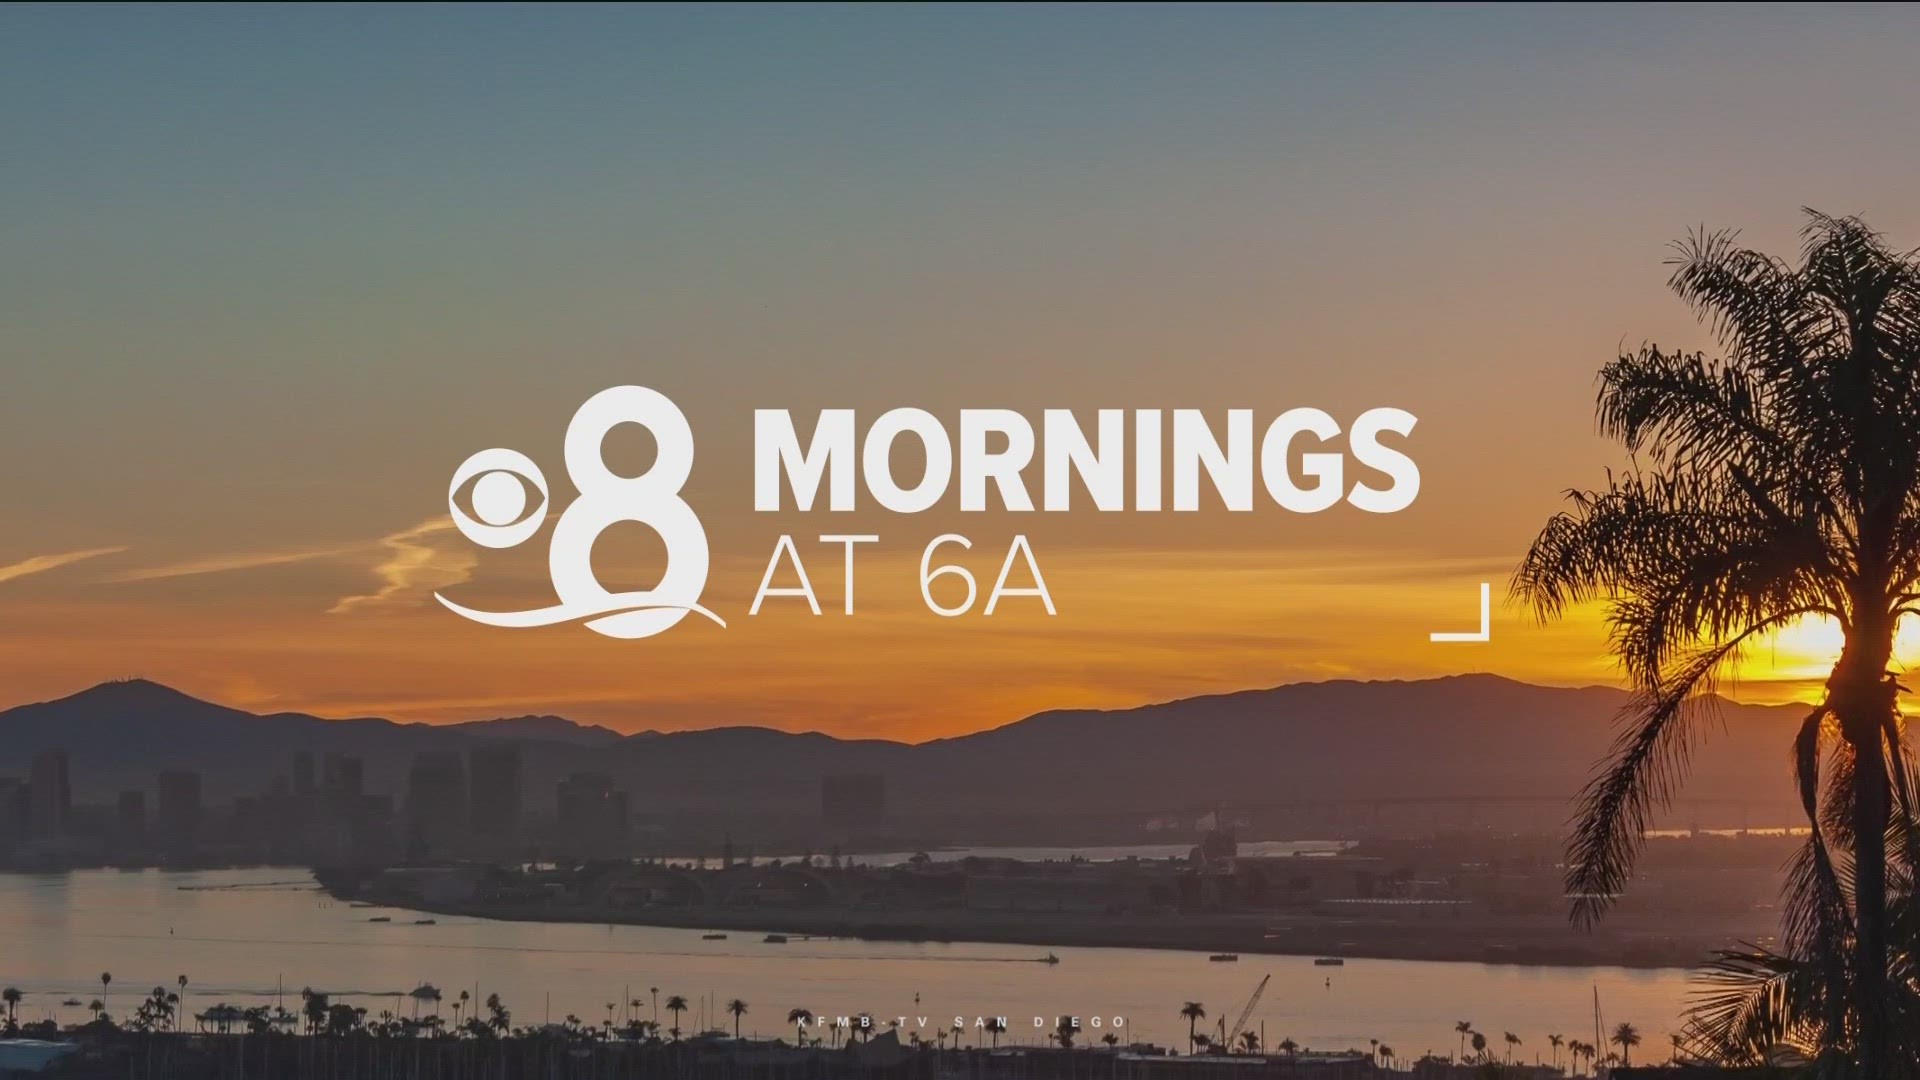 Today's top stories from CBS 8 San Diego on September 19 at 6 a.m.